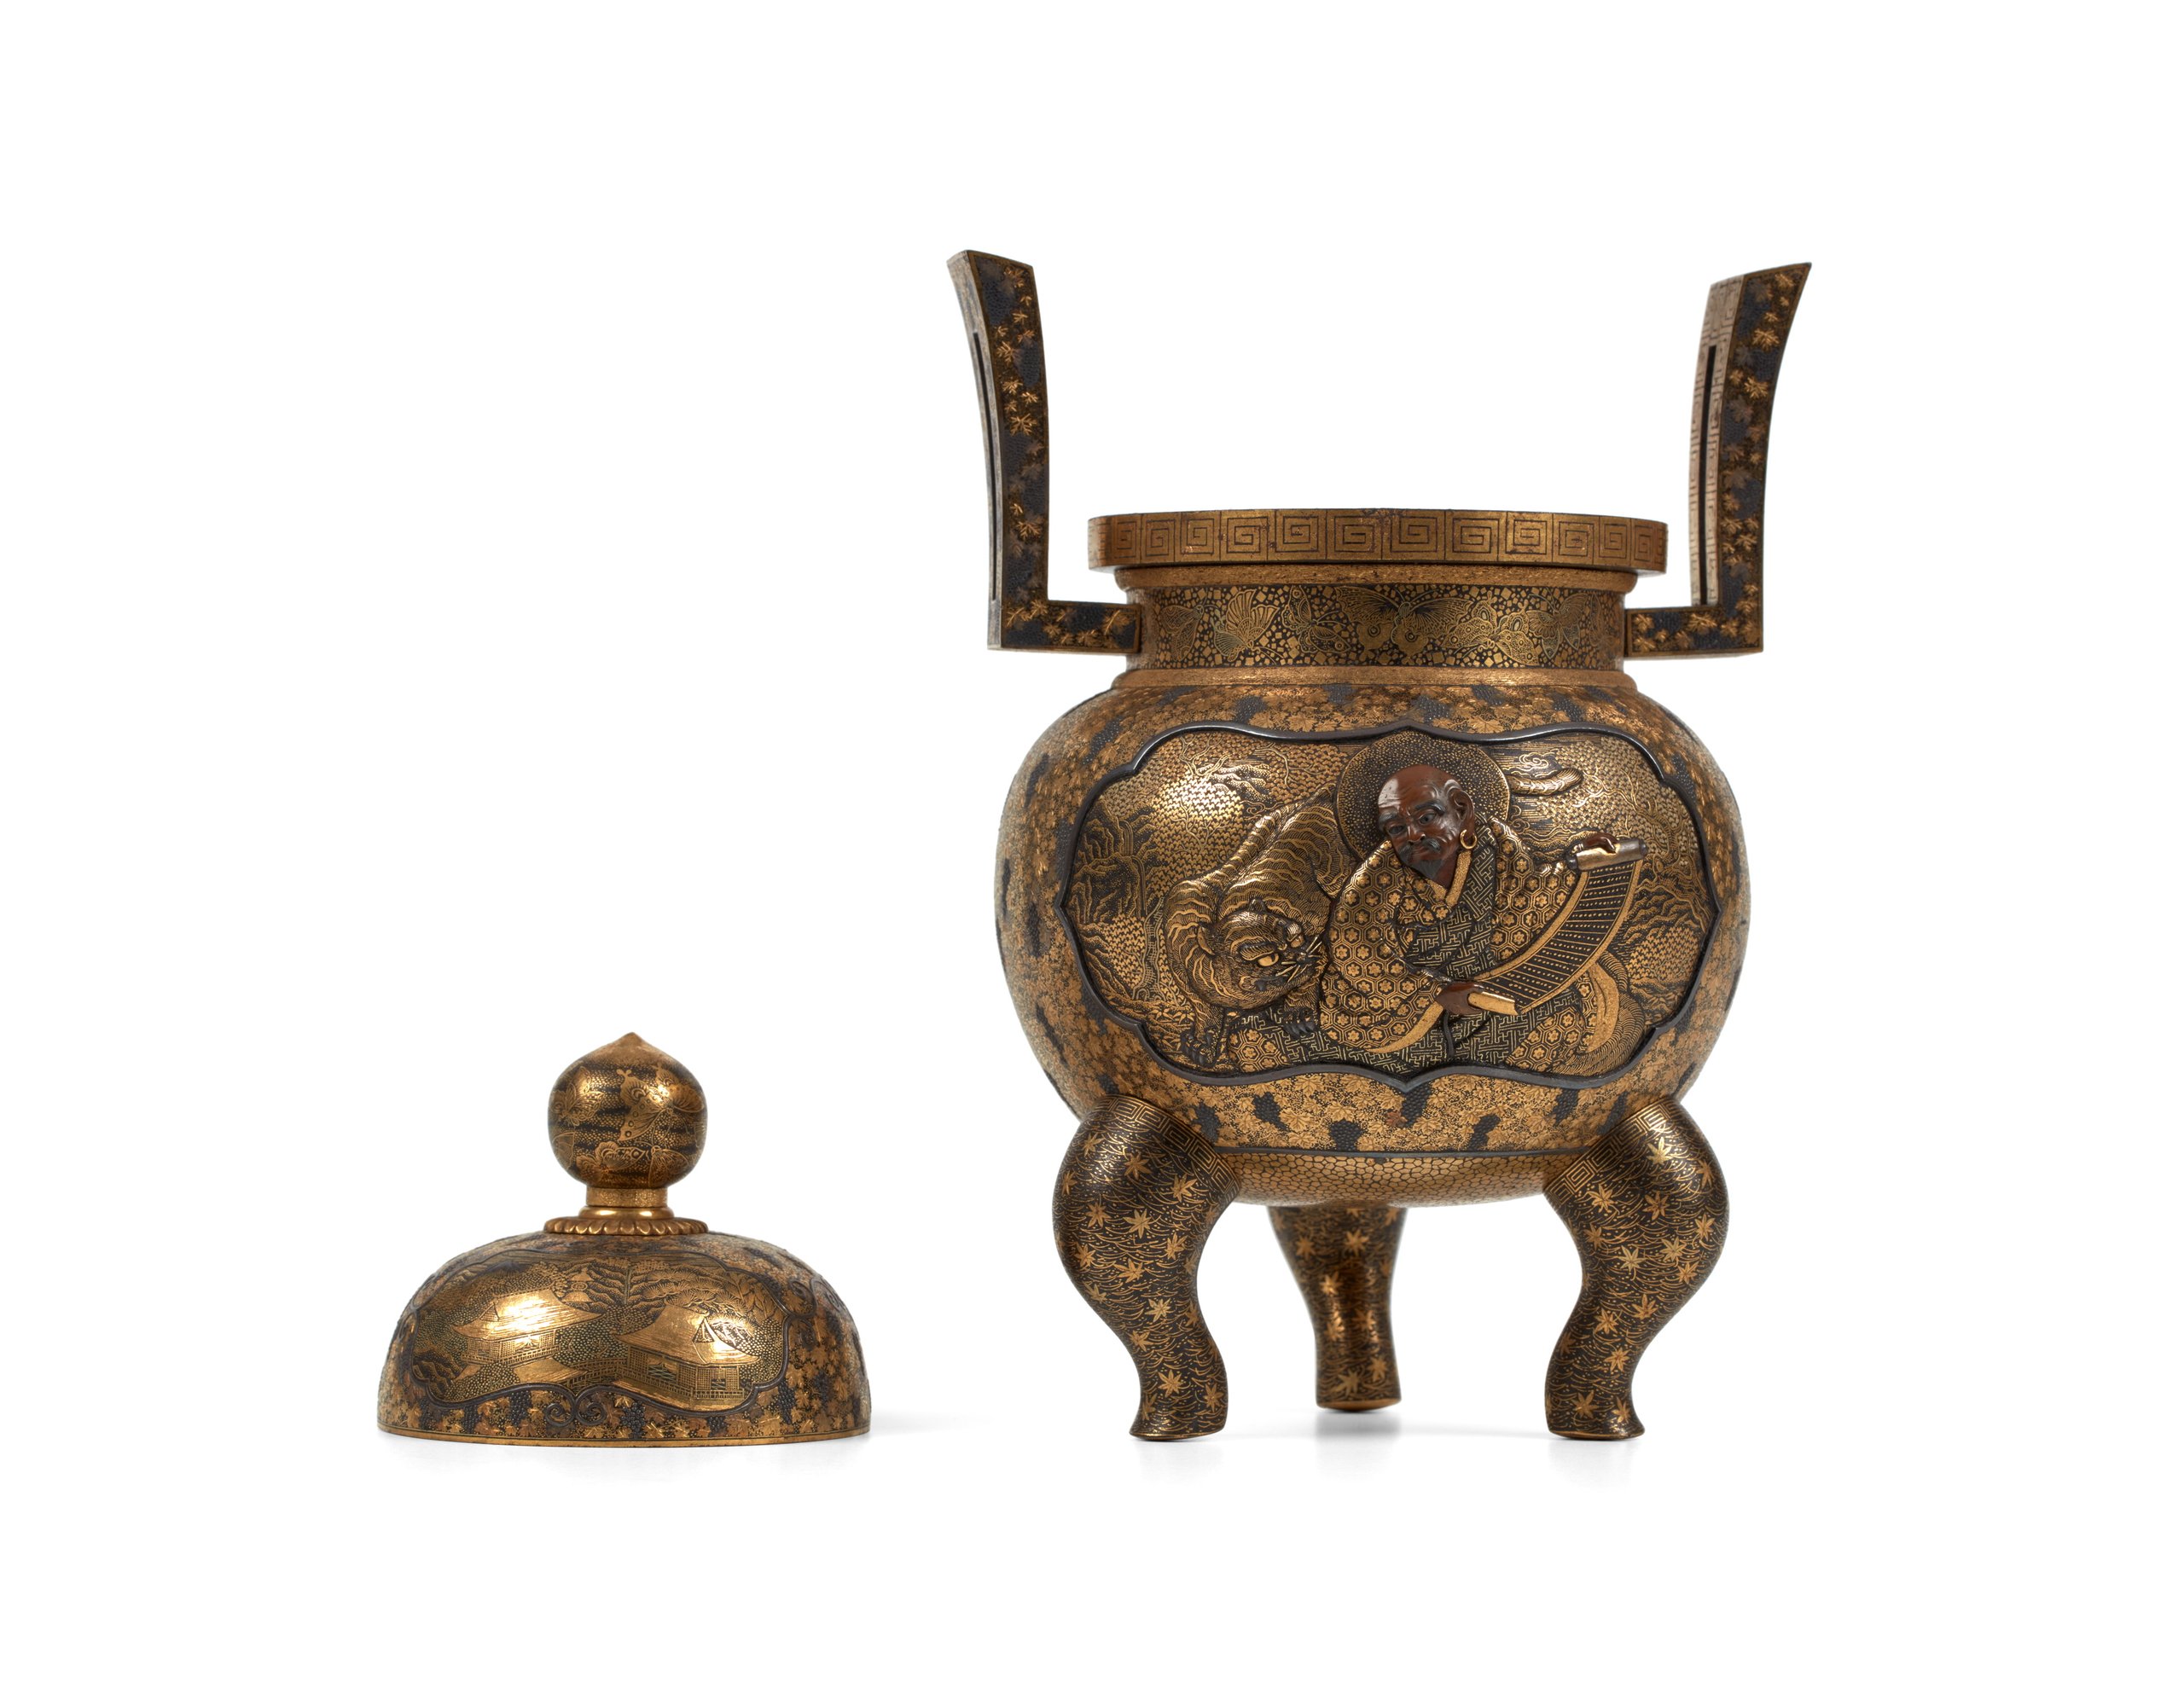 Damascene censer (koro) with lid with cartouche of Buddhist arhat and tiger